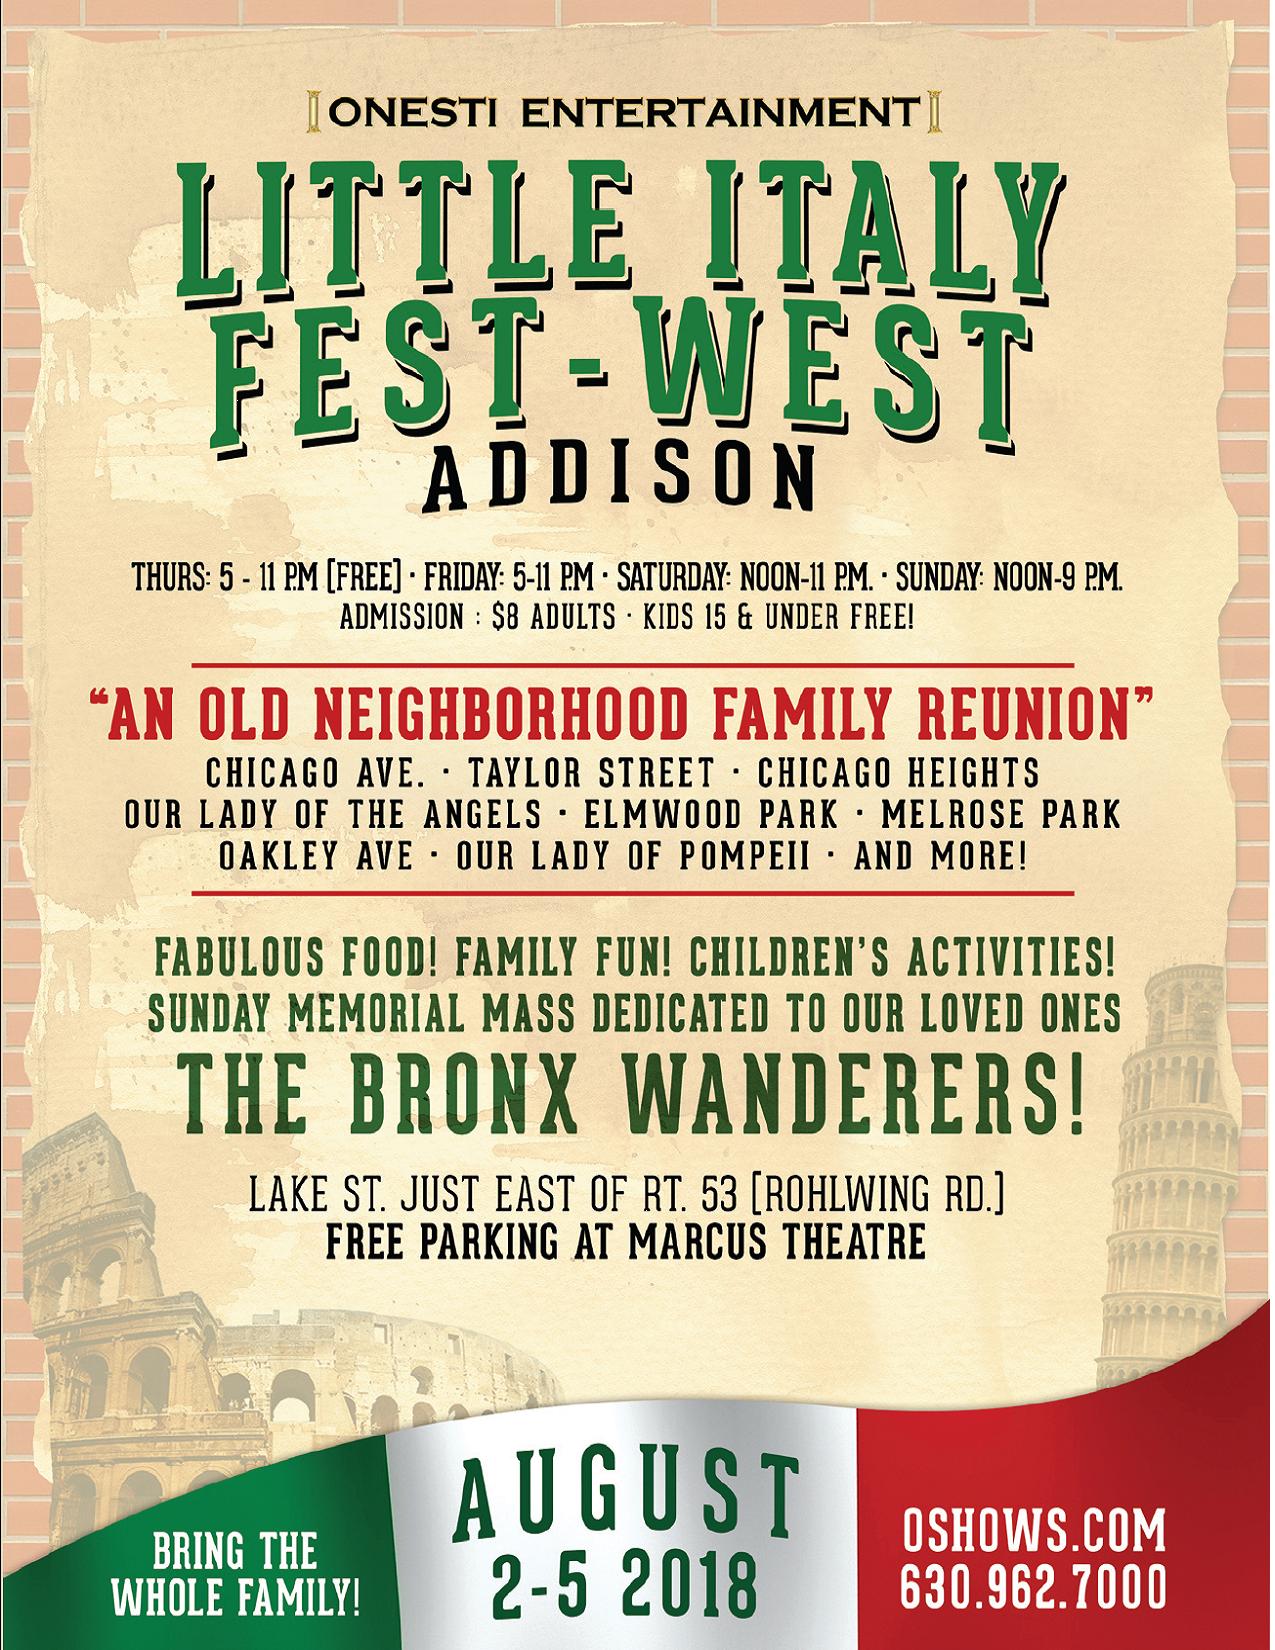 Onesti Entertainment Presents Little Italy Fest West In Addison